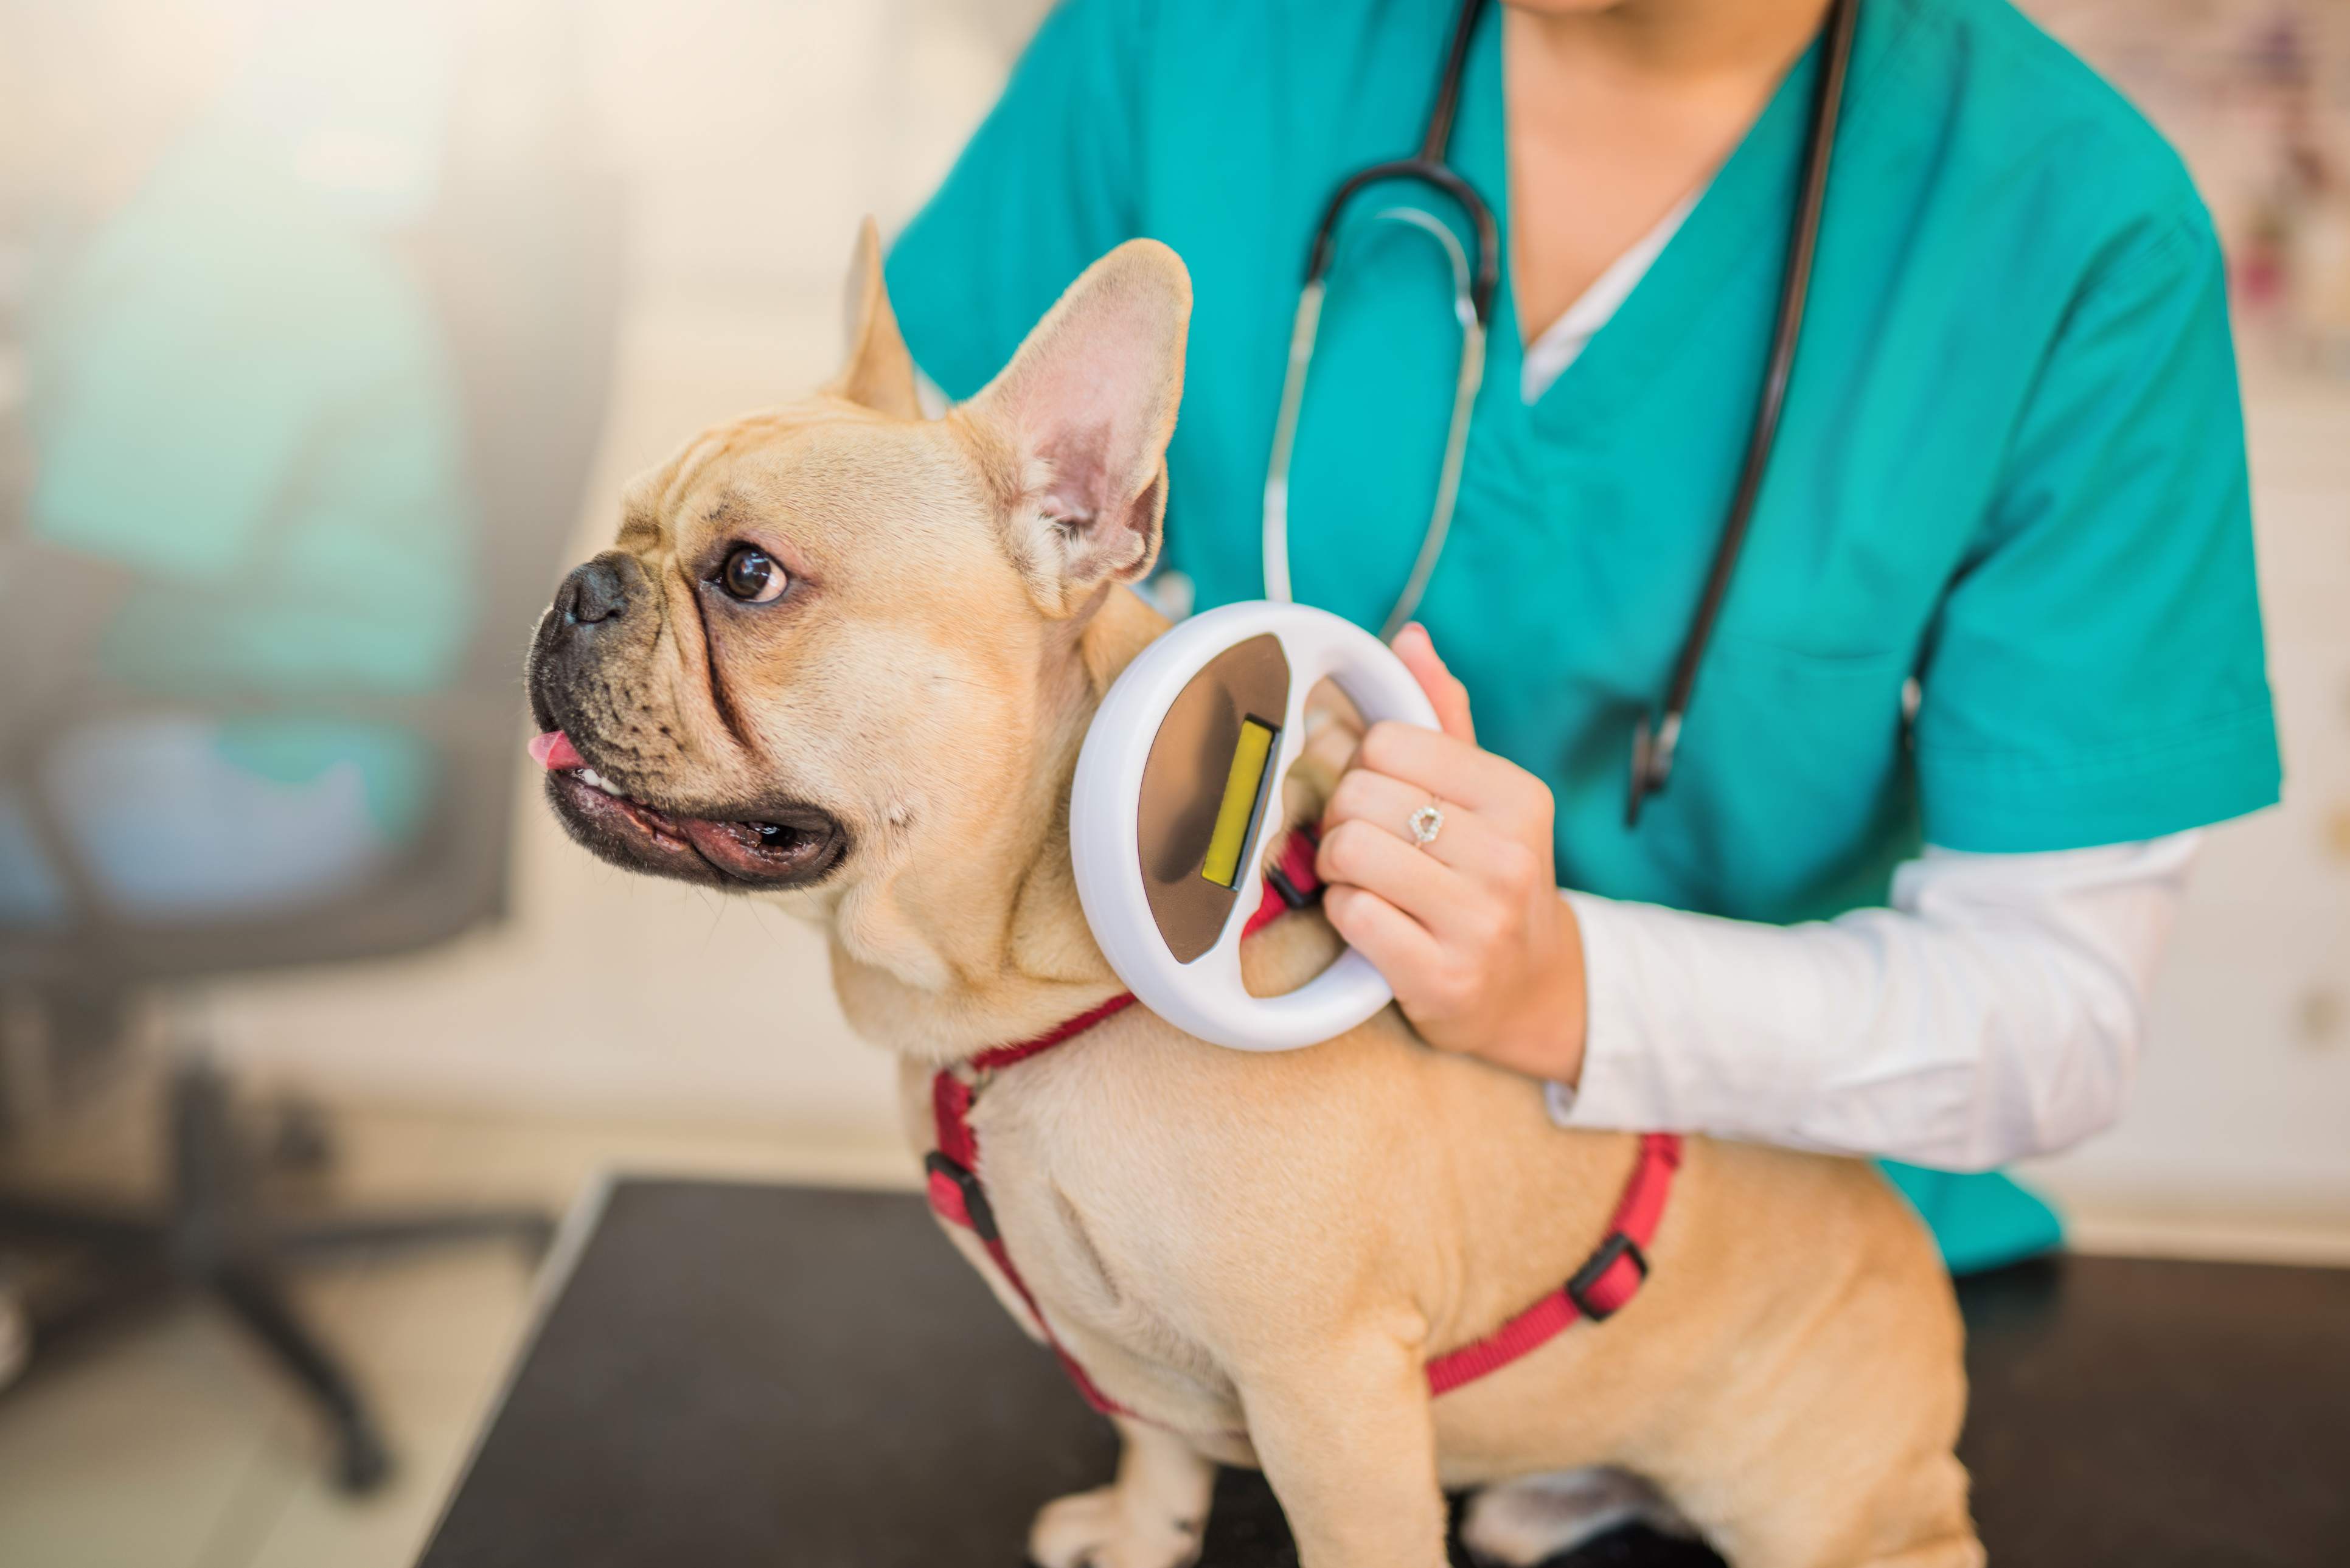 A veterinarian uses a handheld scanner to check a French Bulldog’s microchip